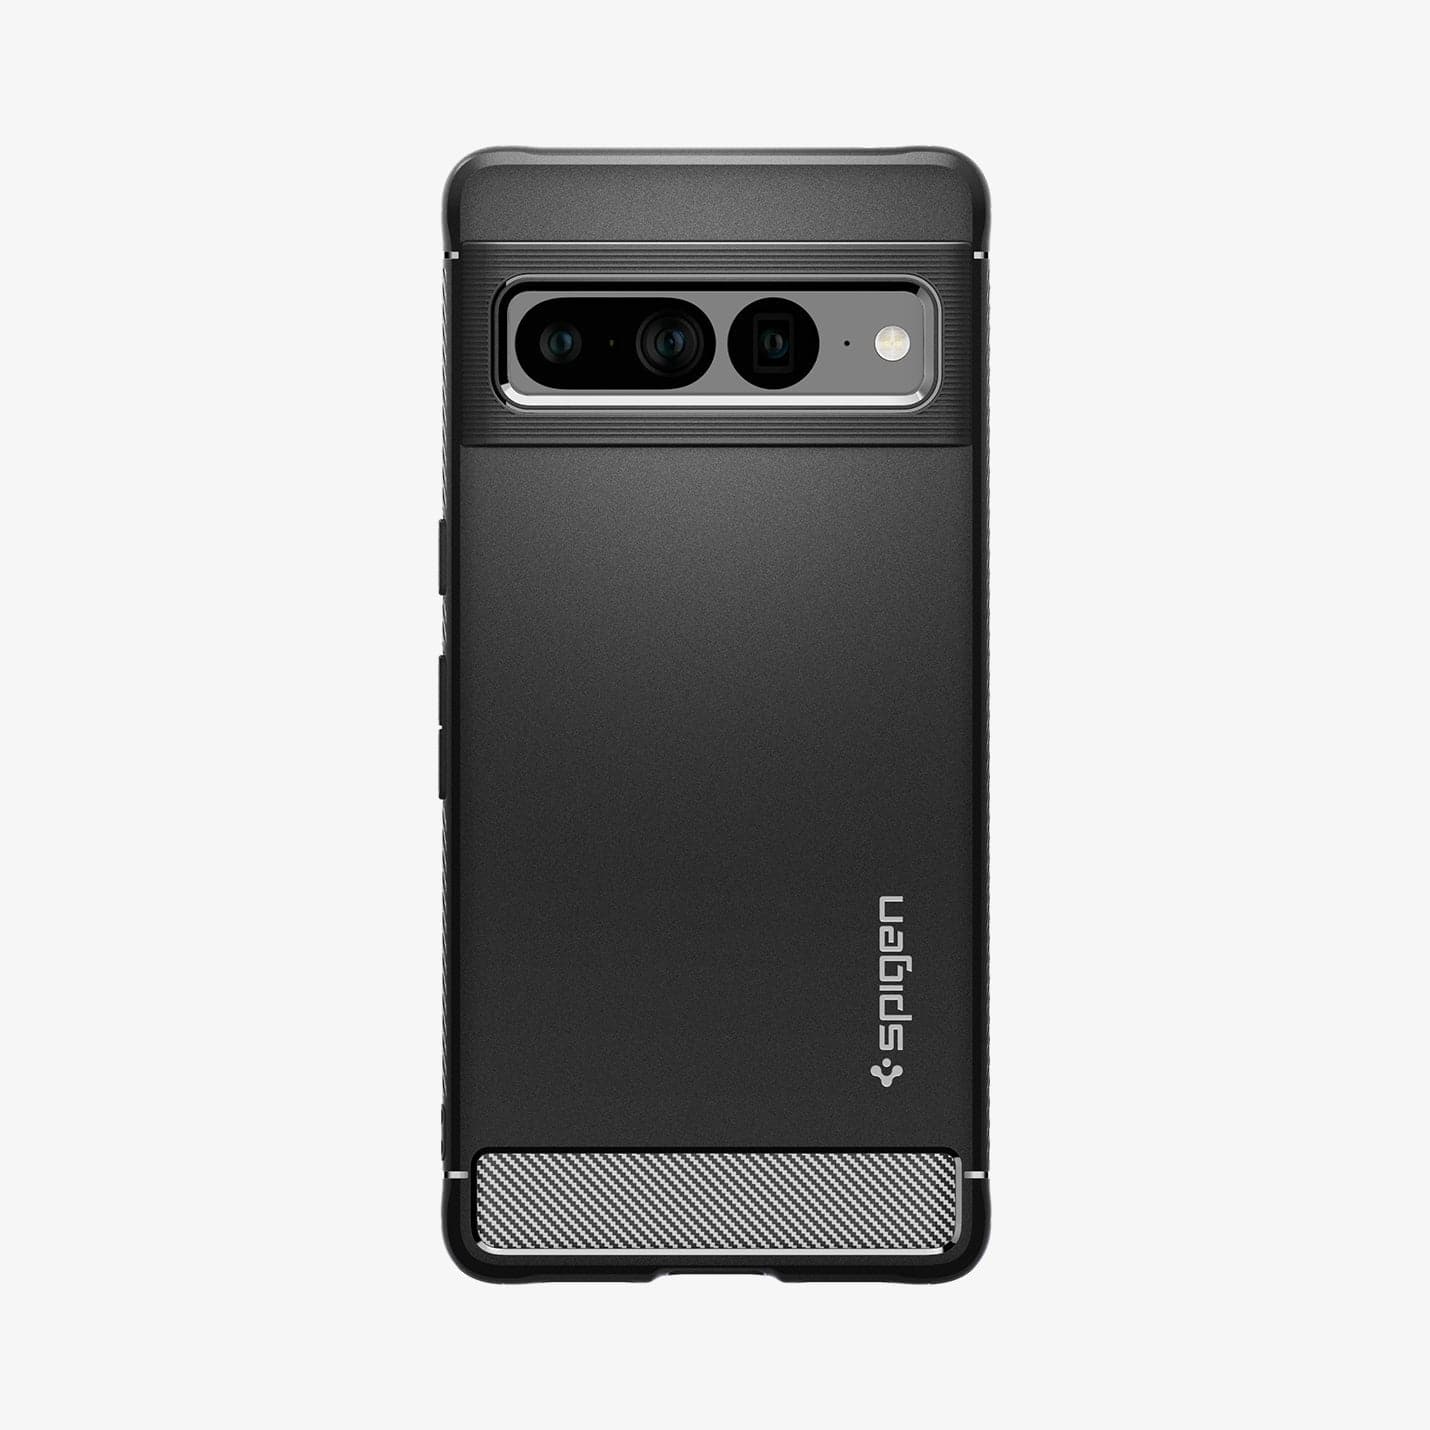 Spigen Pixel 7 cases now live at up to 60% off from $15